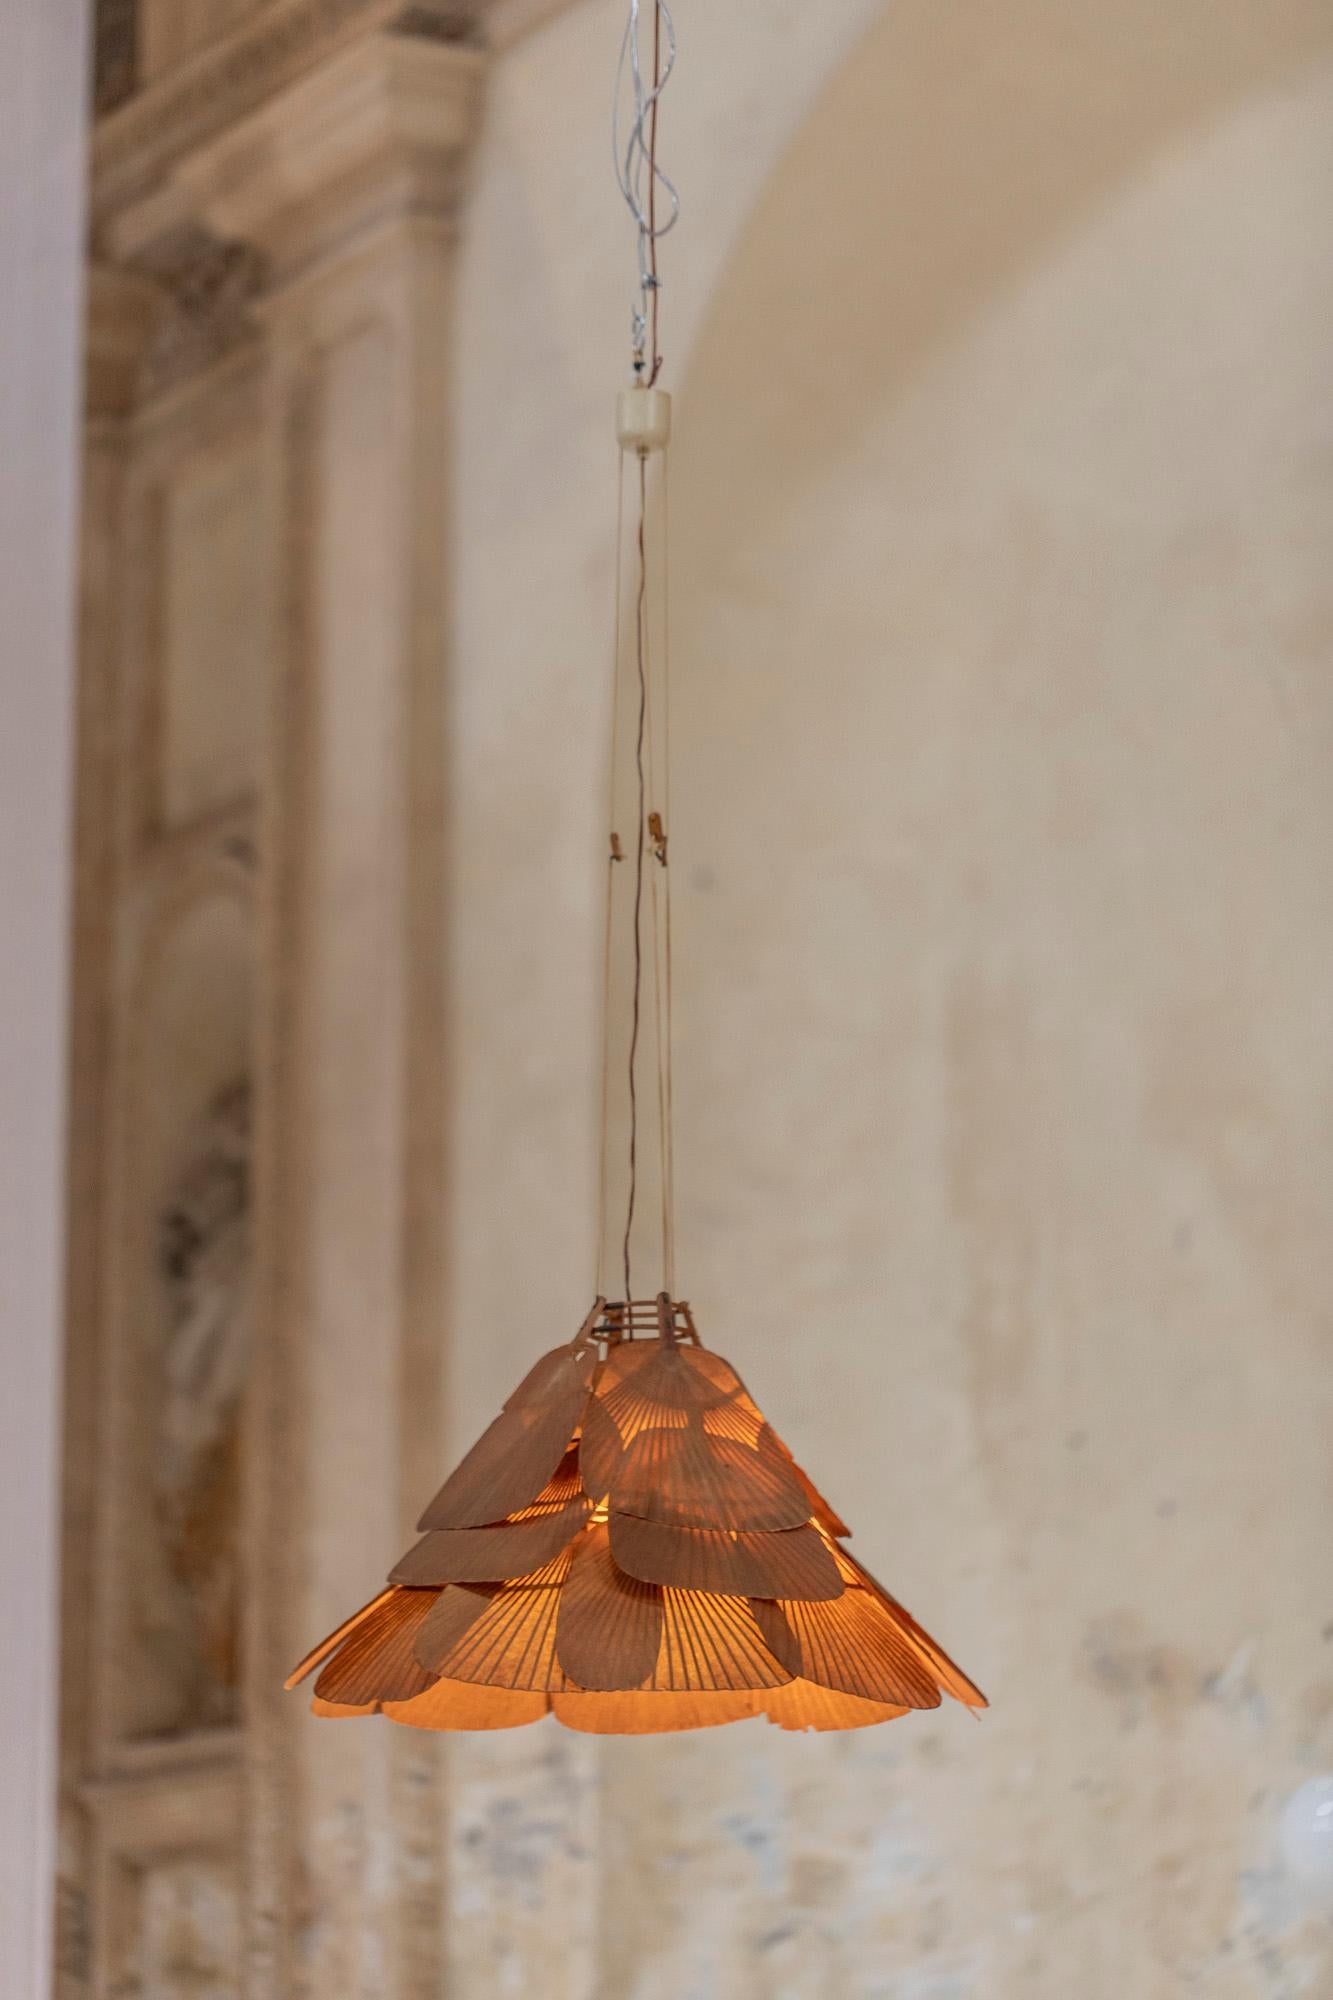 Rare chandelier designed by Ingo Maurer for Design M, in 1975 in Germany. 
Poetic chandelier executed in bamboo and rice paper fans, from Uchiwa series.
Amazing brown patina.
The height is adjustable by suspension from 3 strings.